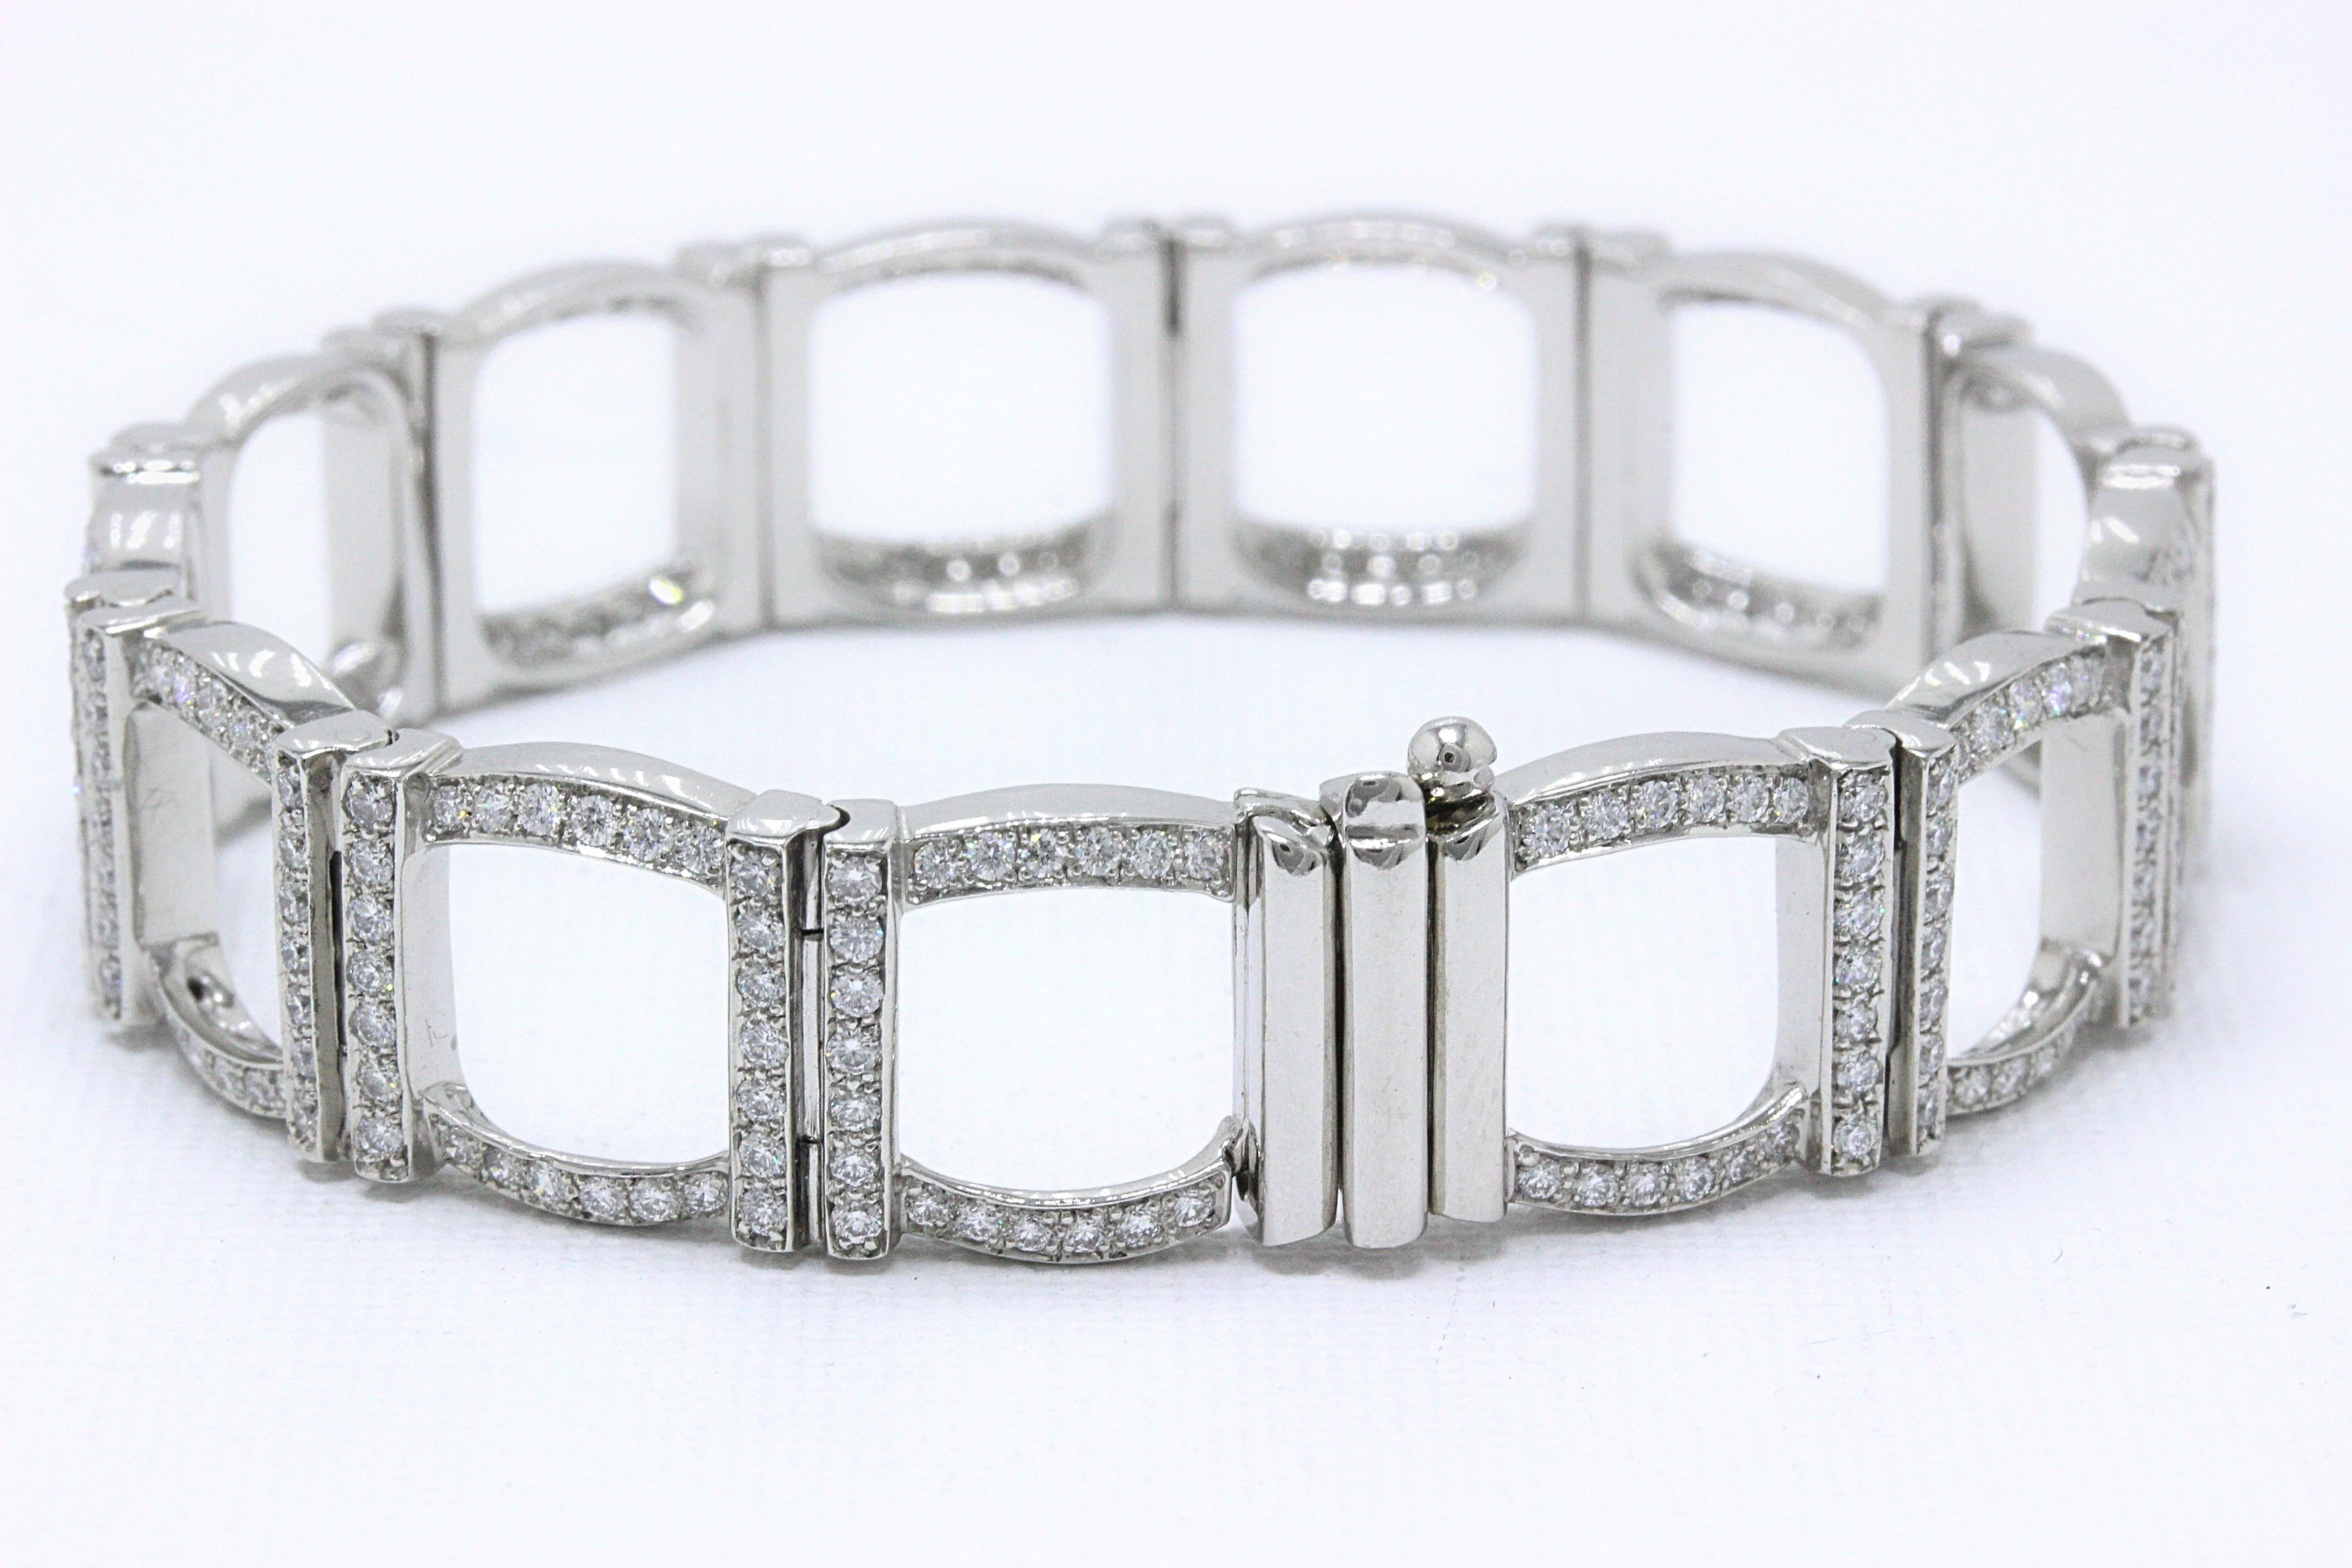 Tiffany & Co. Diamond and Platinum Open Square Link Bracelet Rounds 4.00 TCW 5